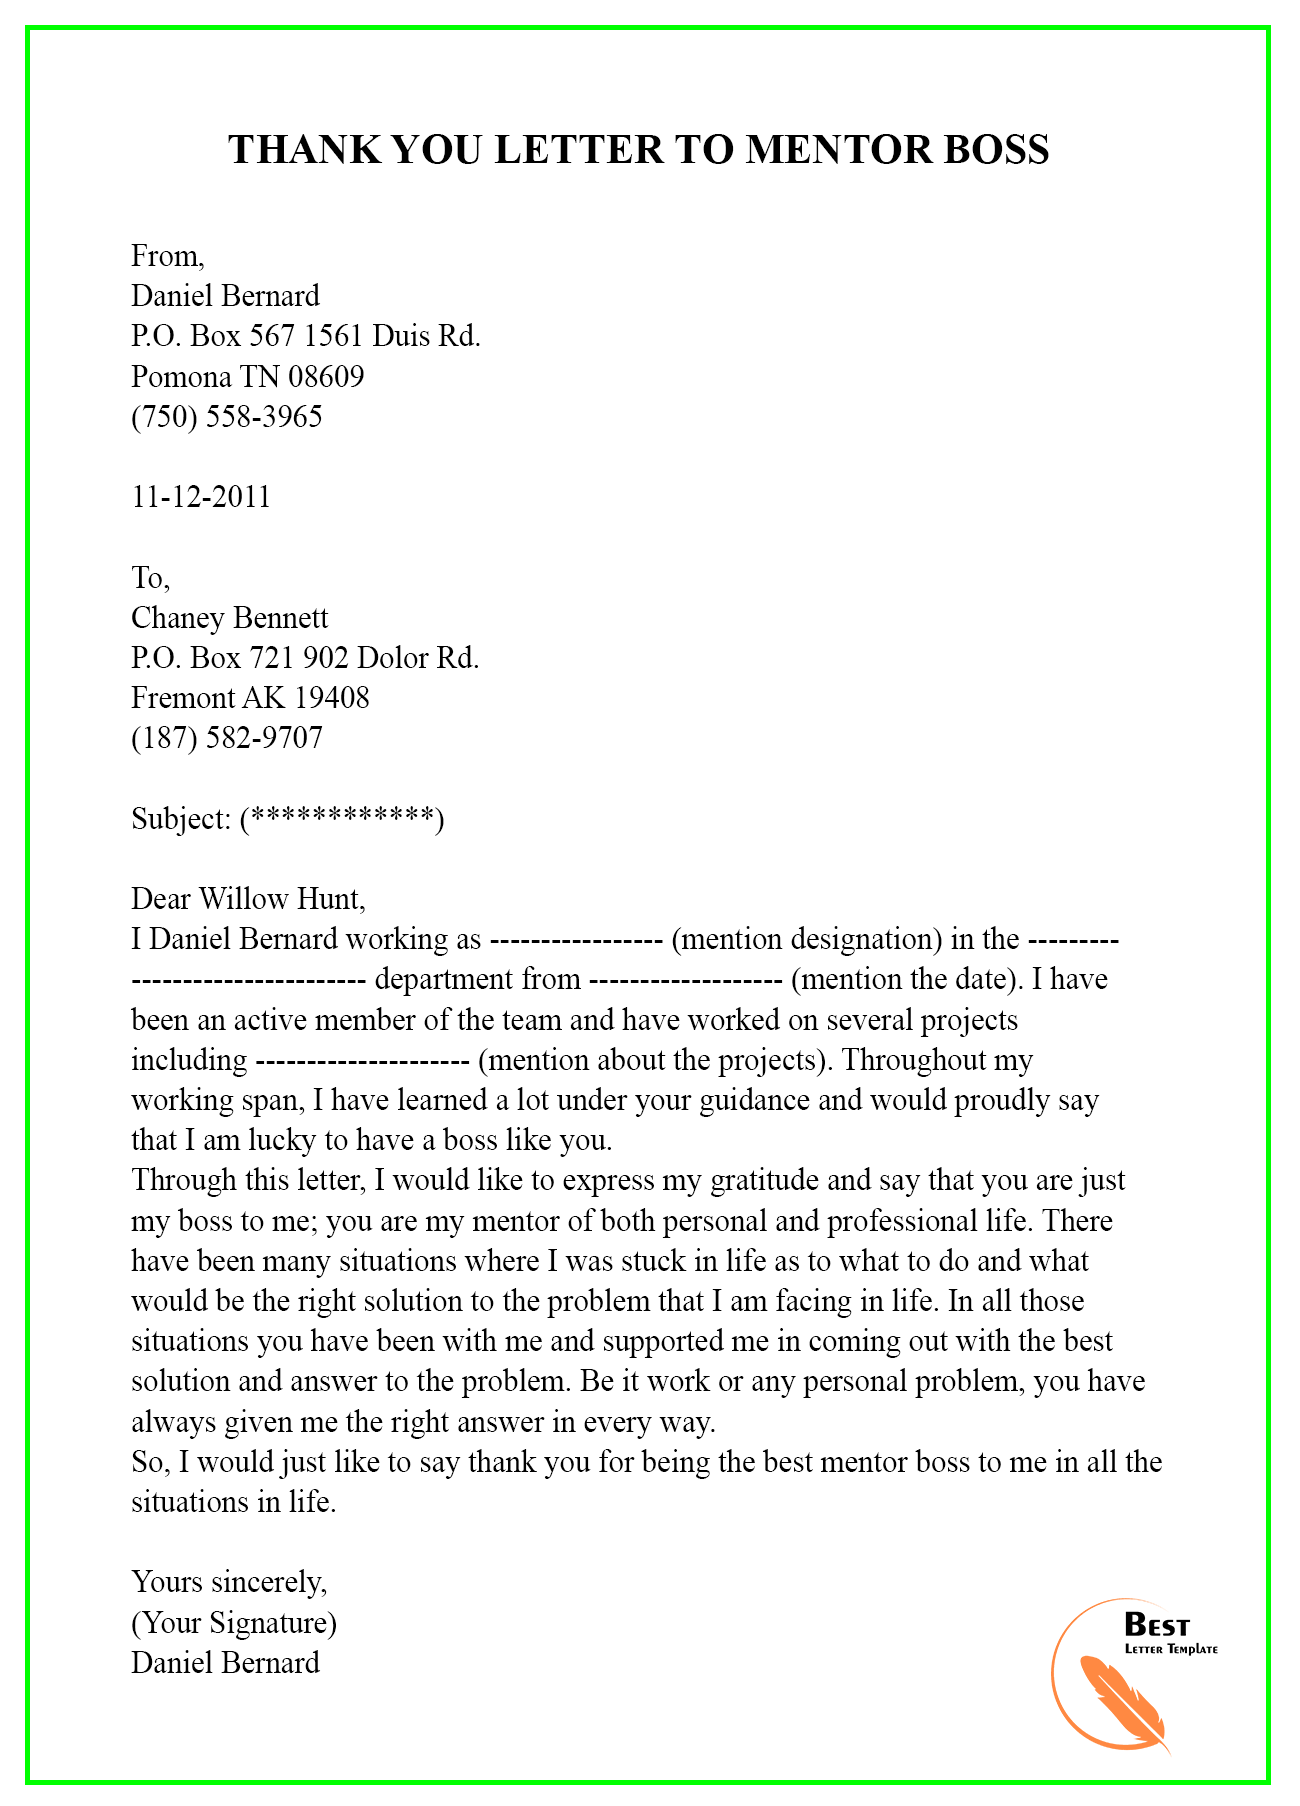 Thank You Letter Template to Mentor Sample & Examples